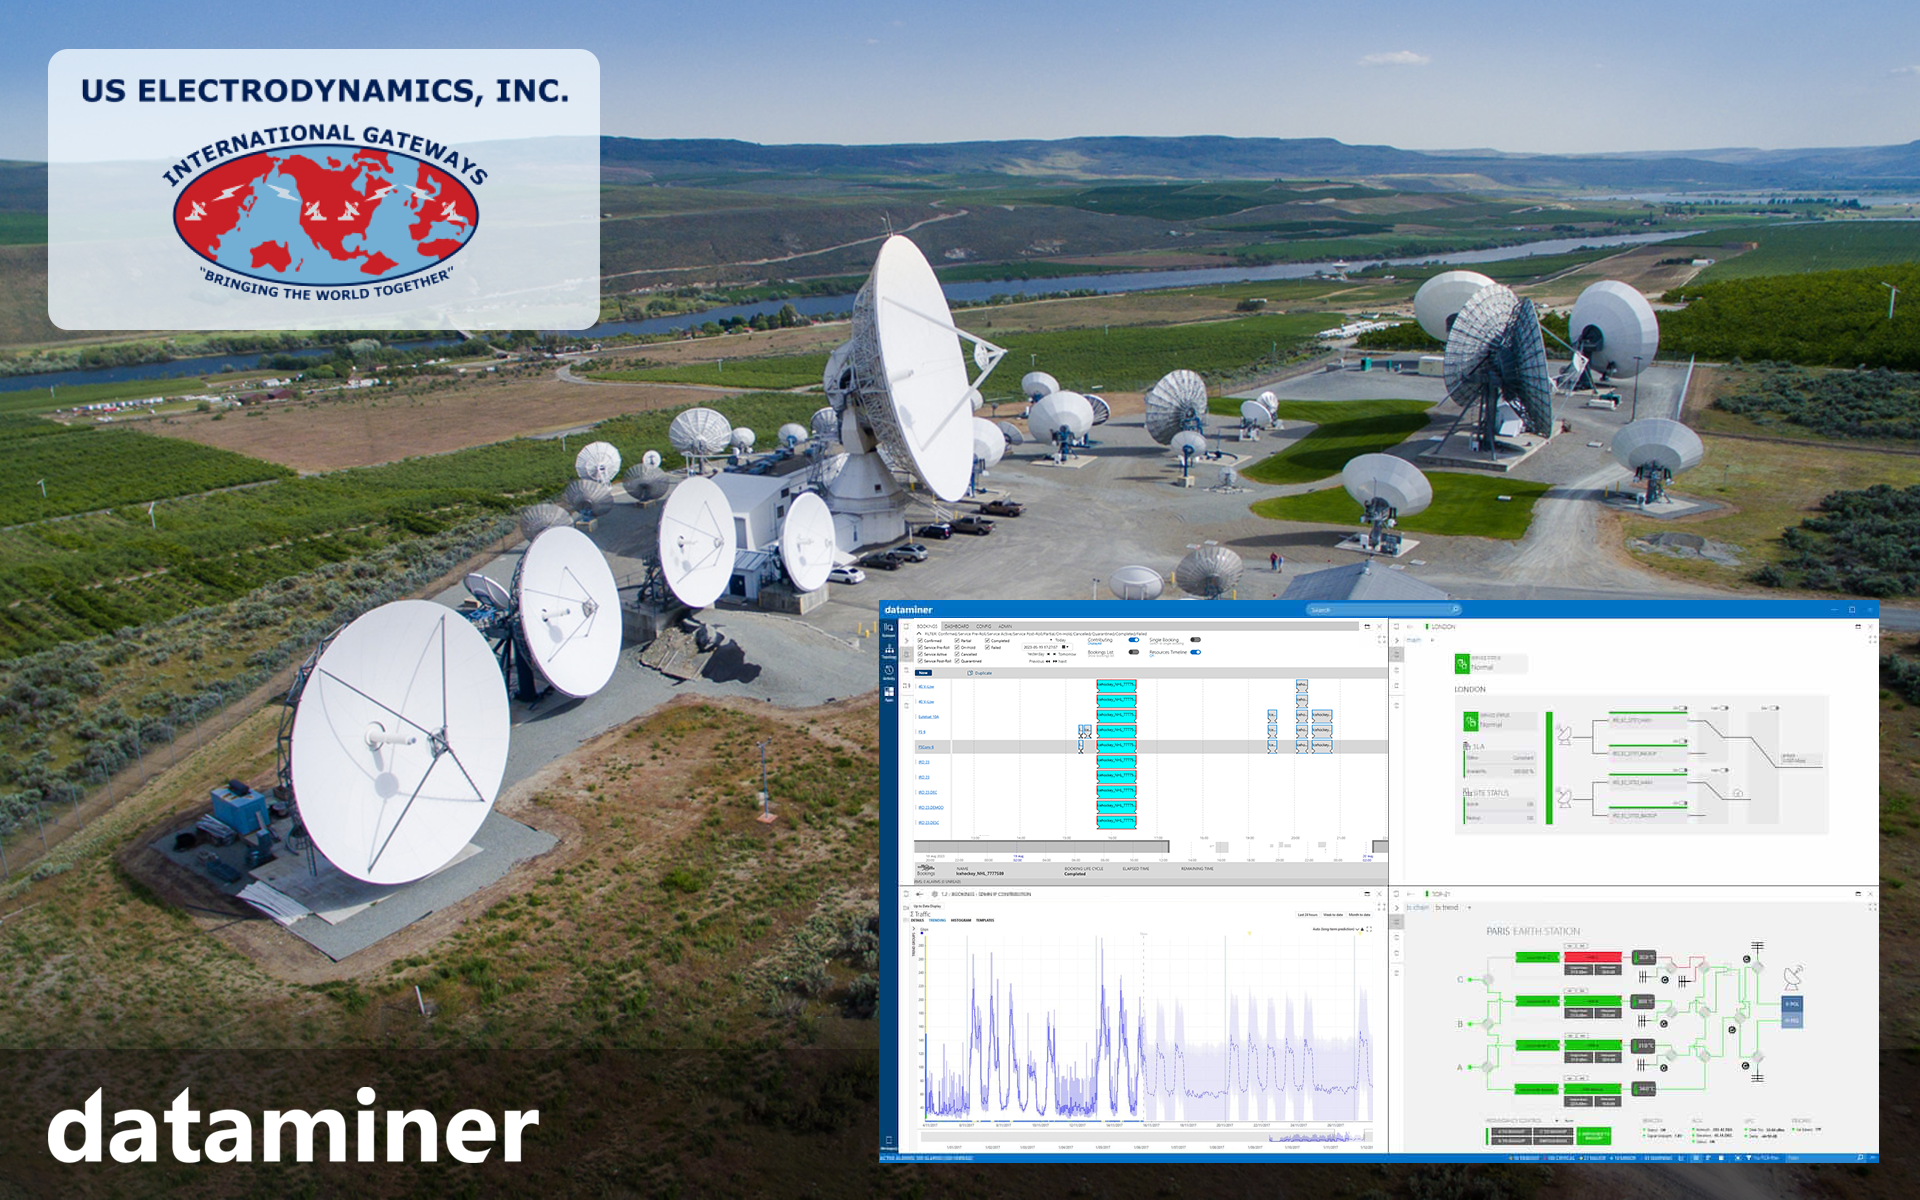 USEI chooses DataMiner for comprehensive end-to-end monitoring and control of its teleports